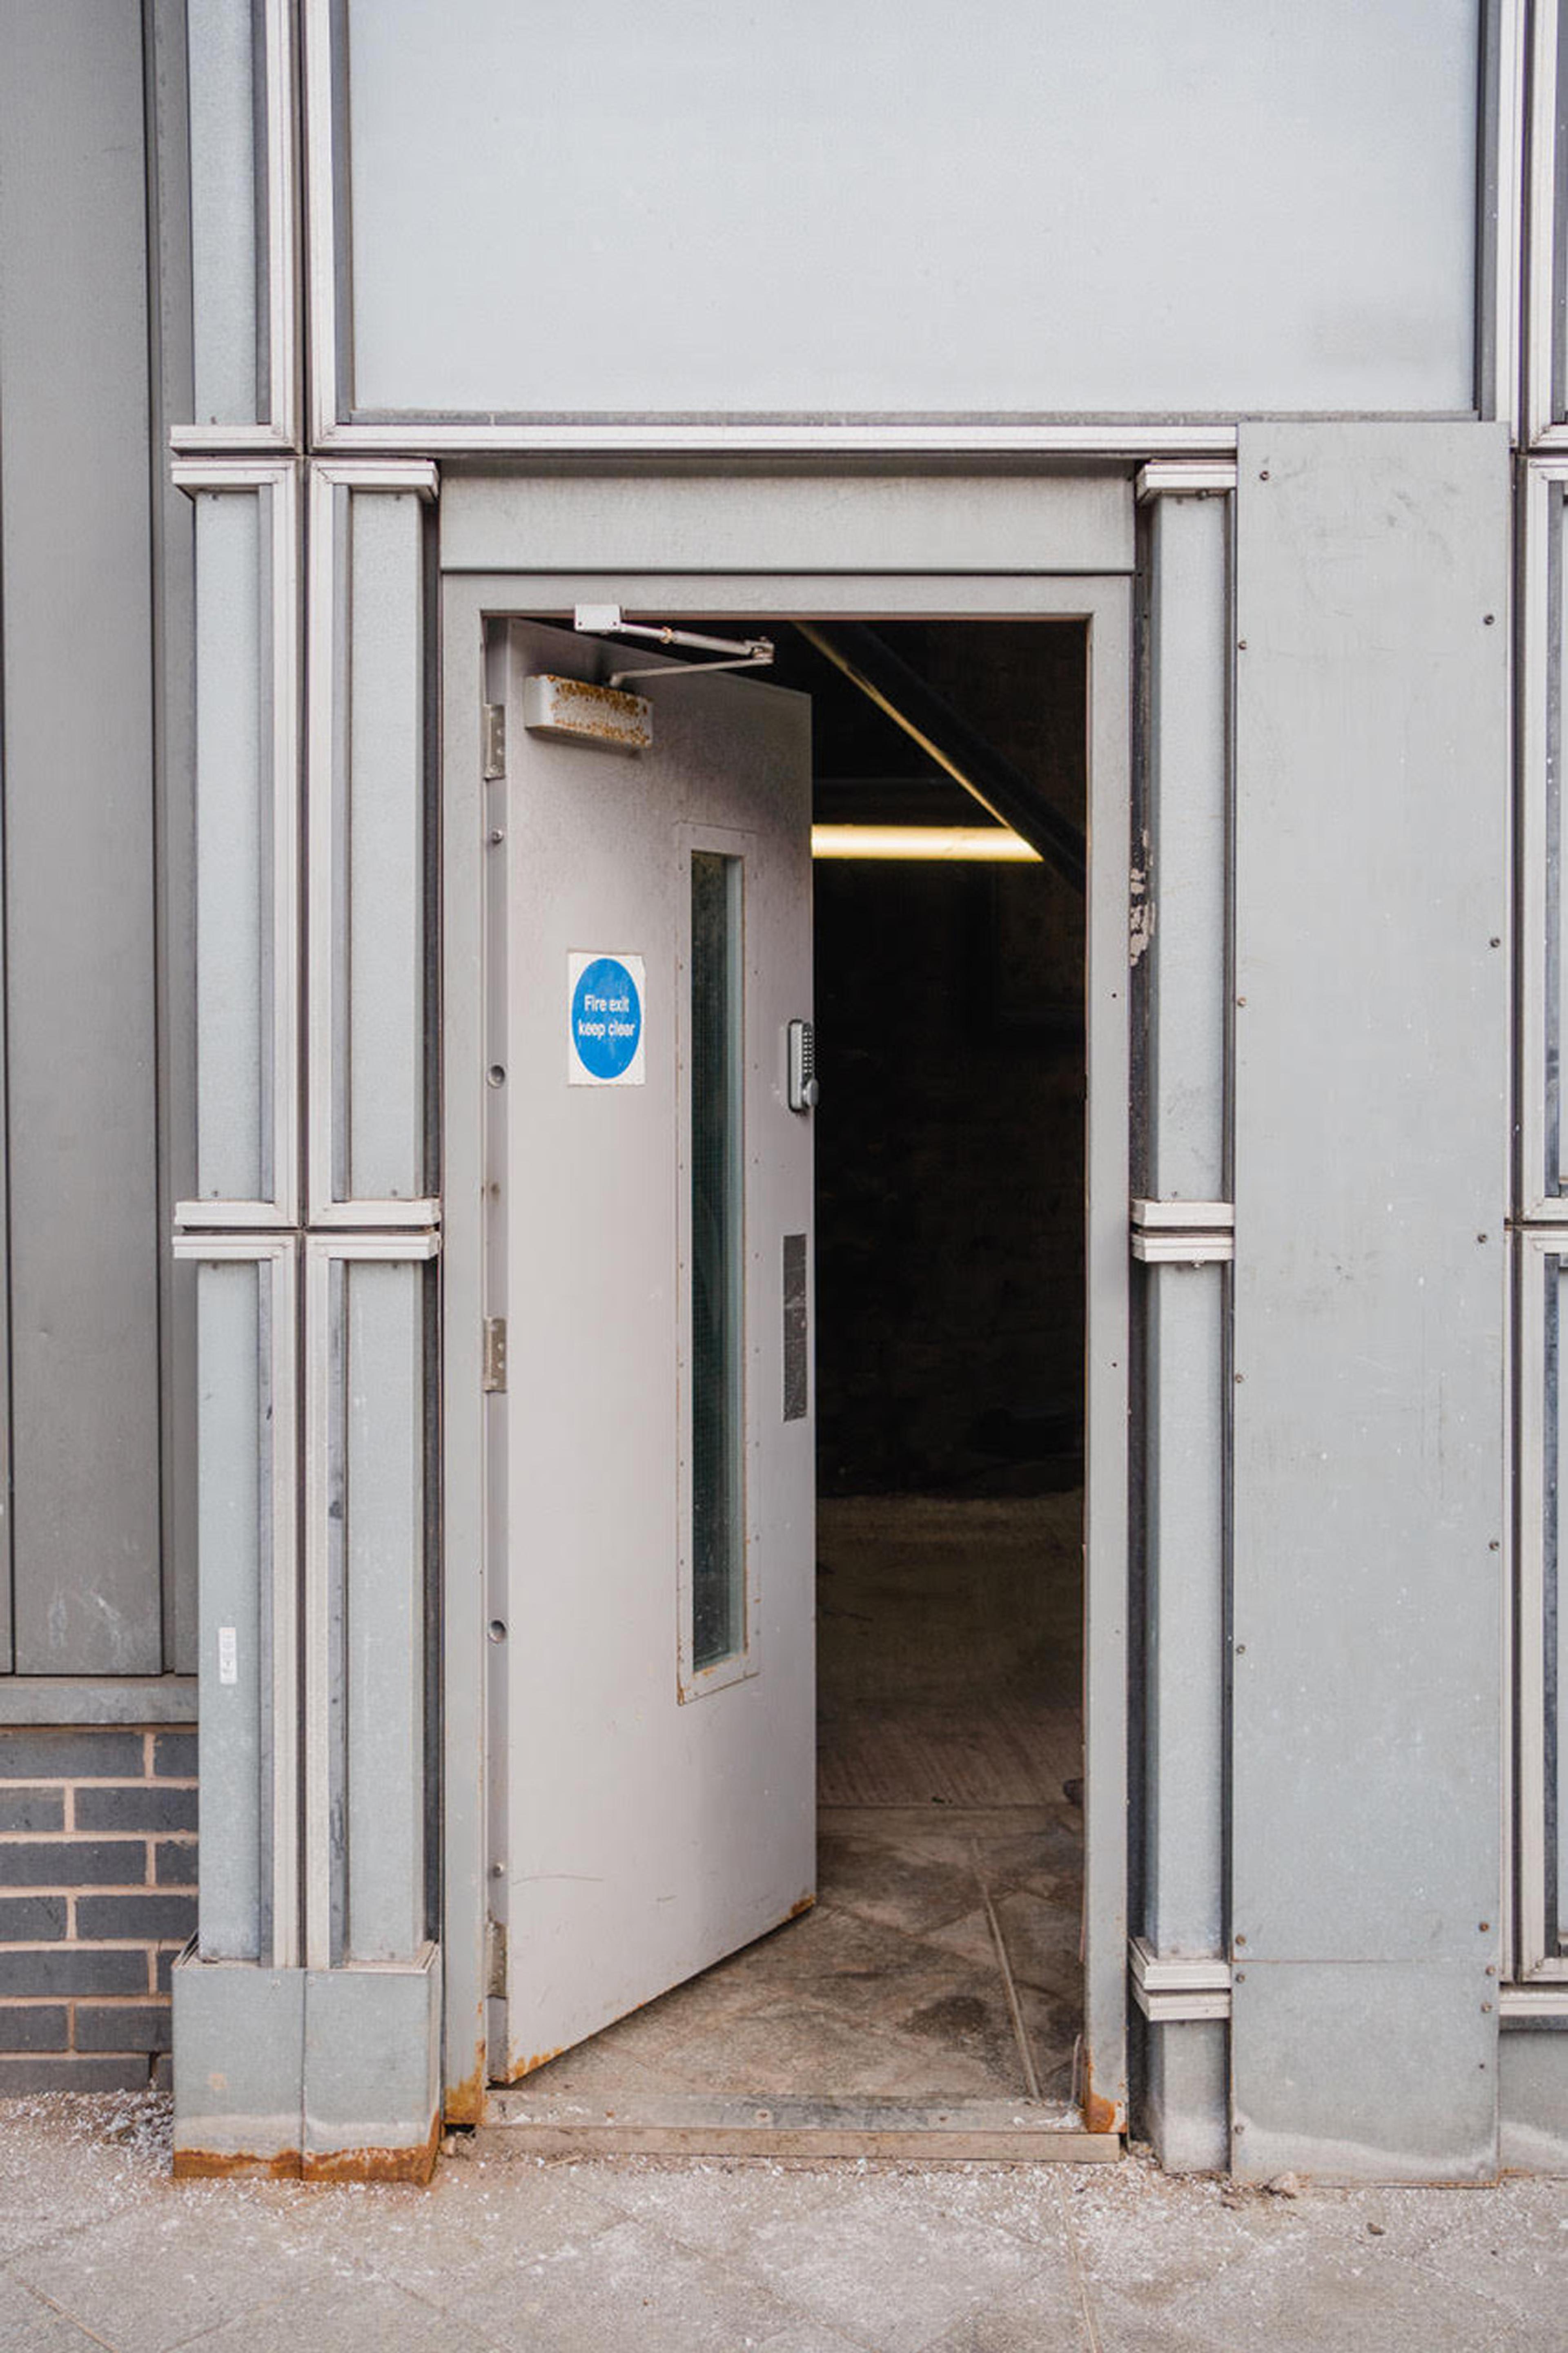 A grey door with a blue fire exit sticker is open to a dark space